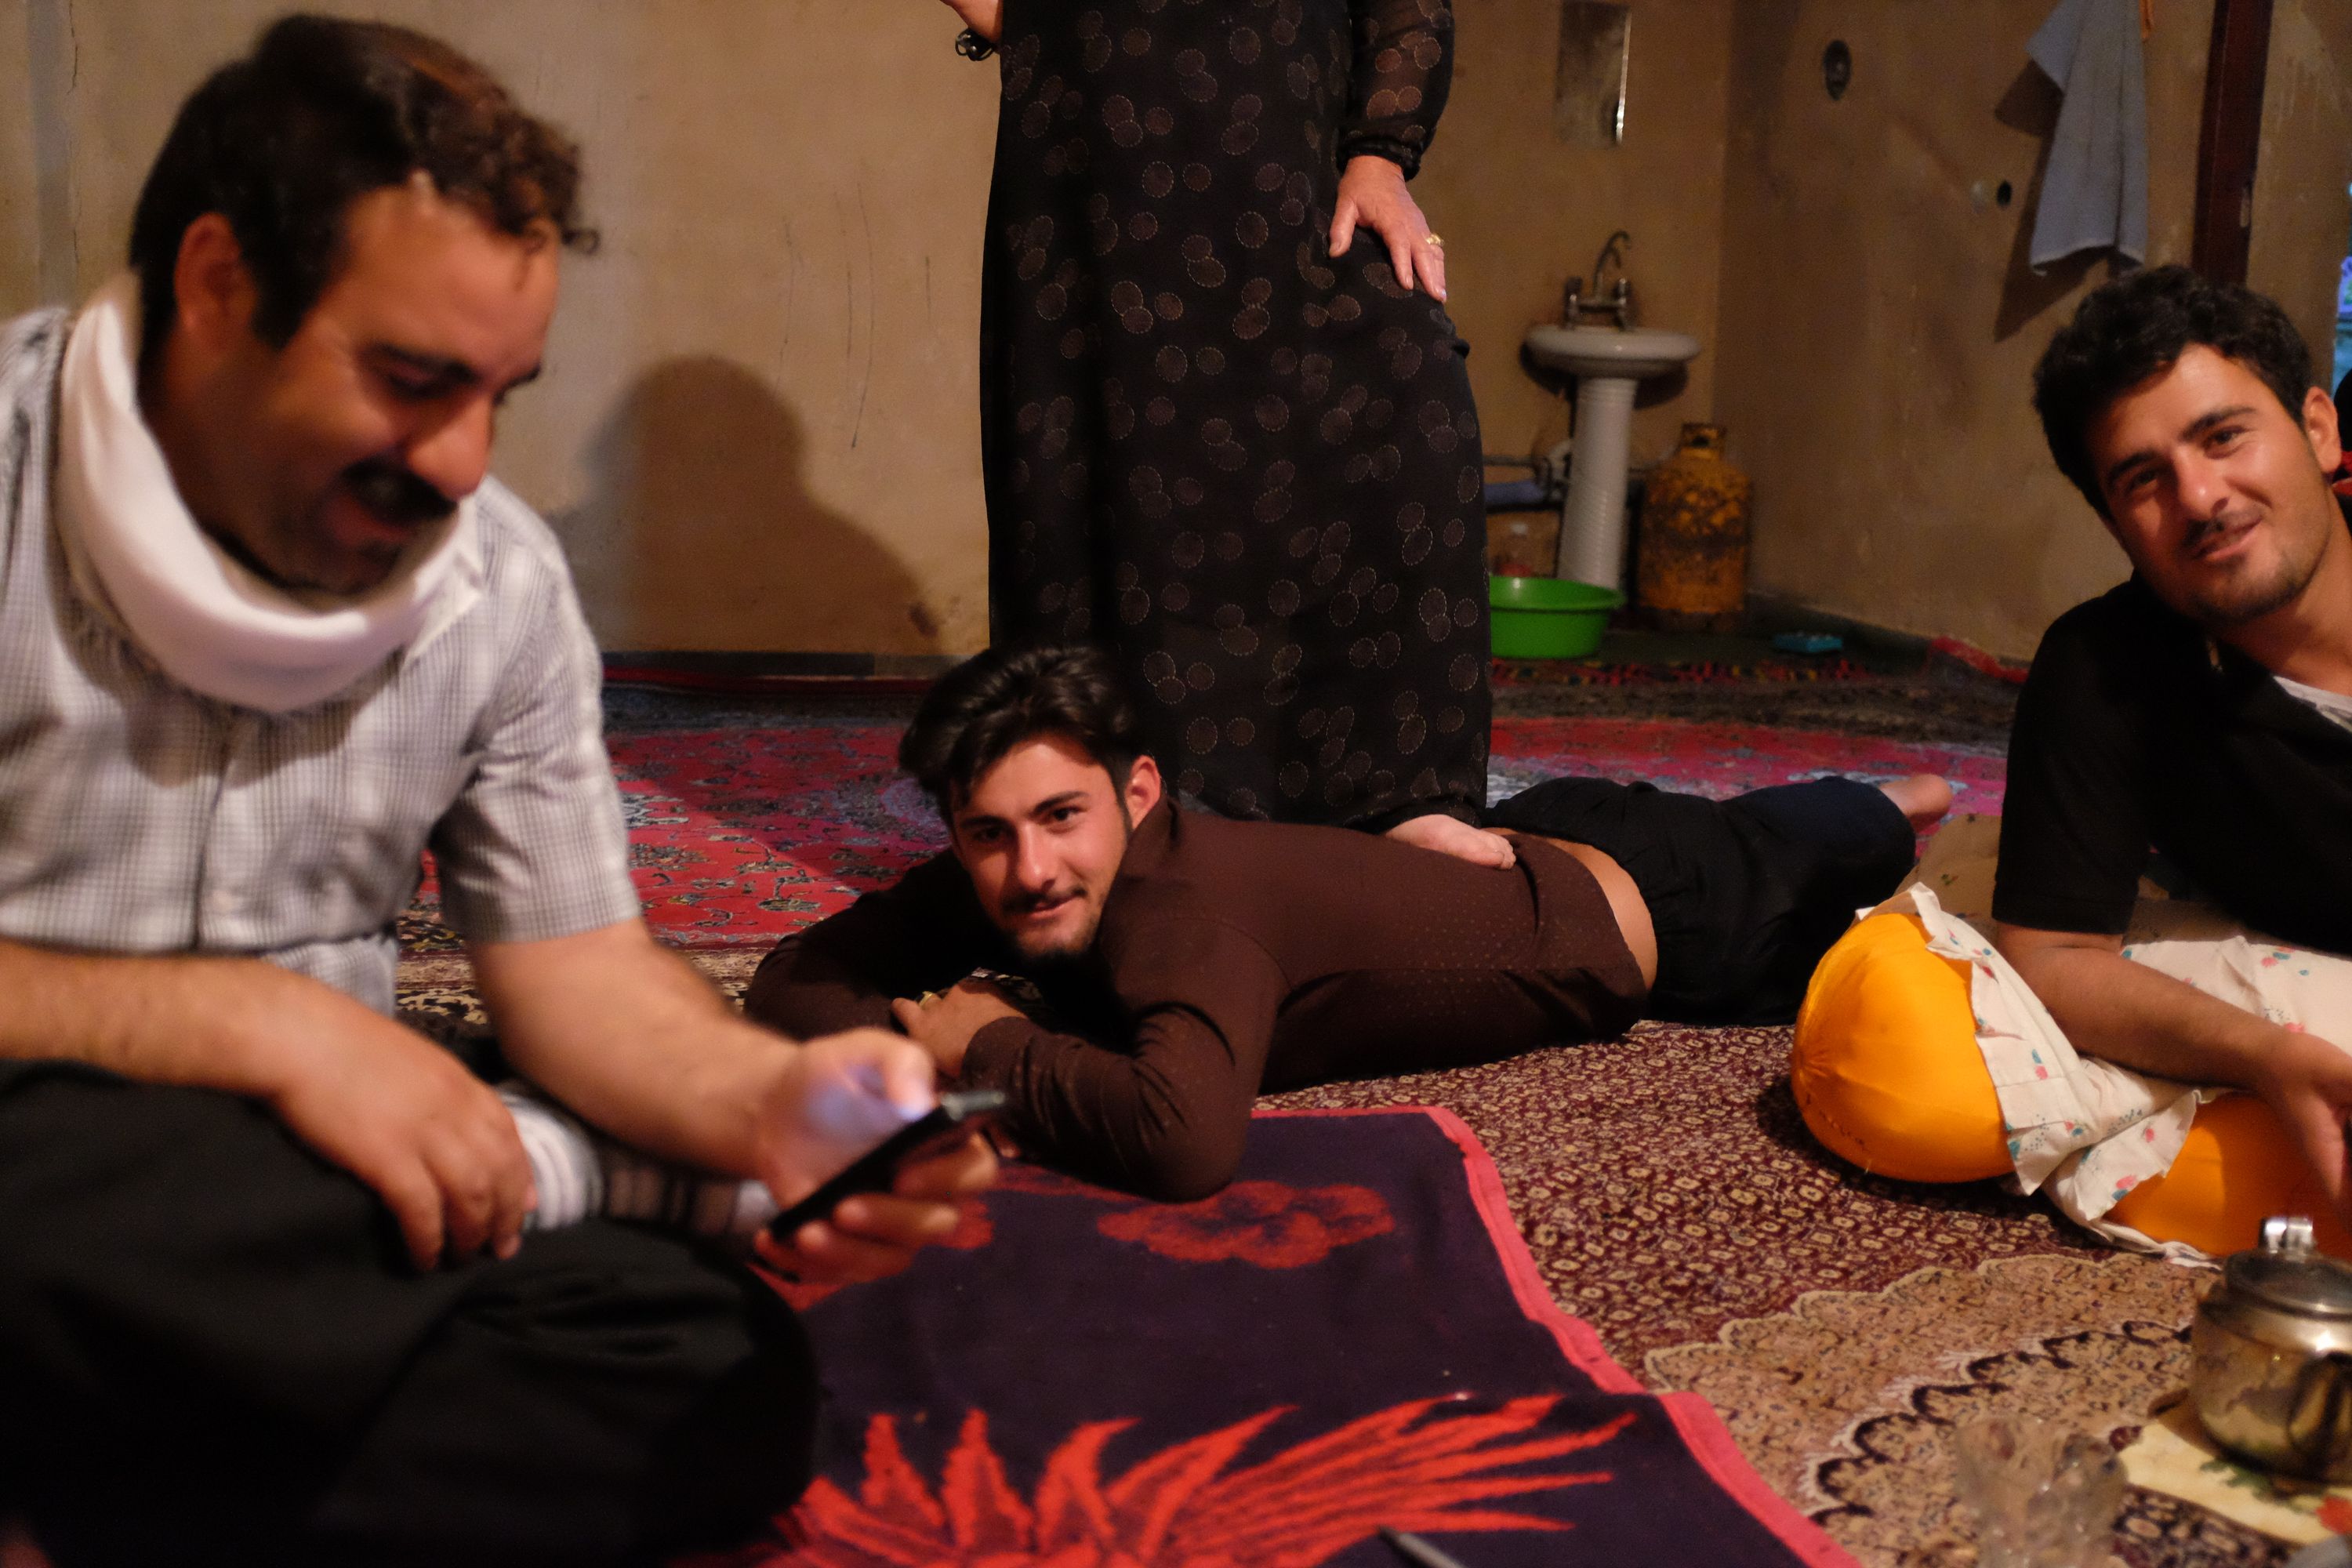 Three young man lie and sit around on a carpeted floor, with a woman stepping lightly on the back of one of them.